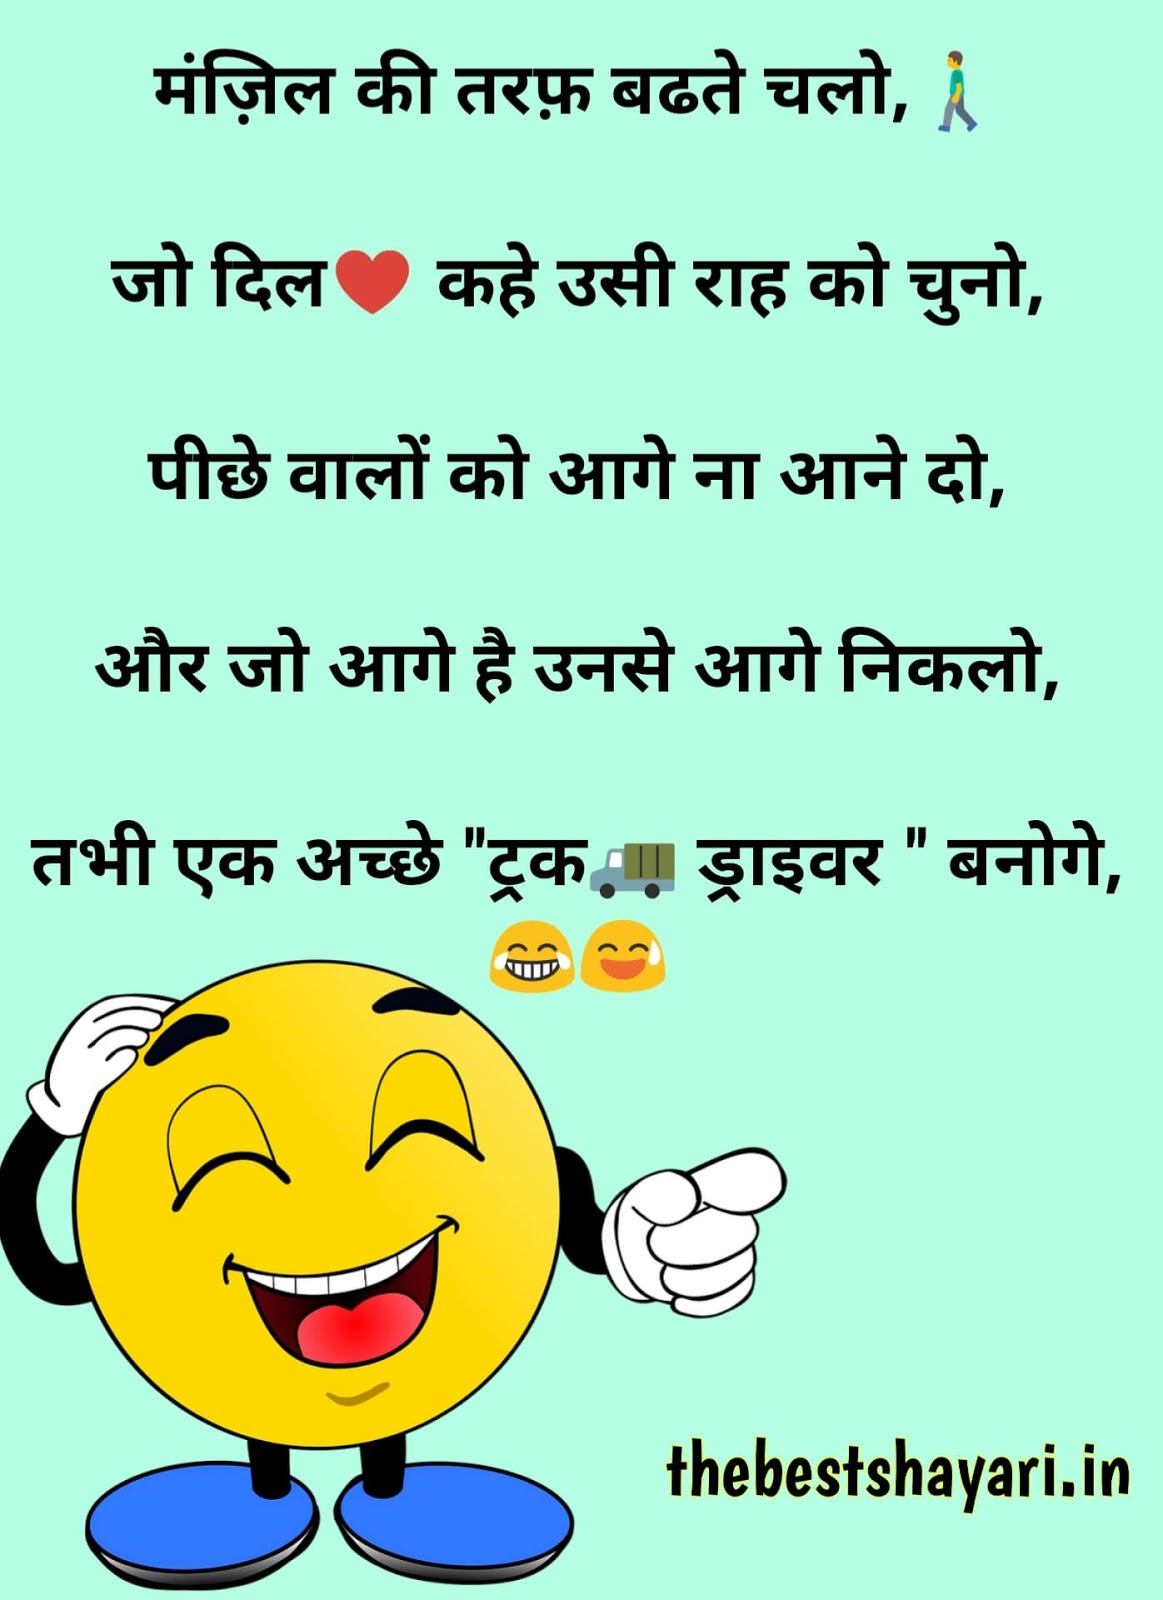 Funny jokes for friends in hindi